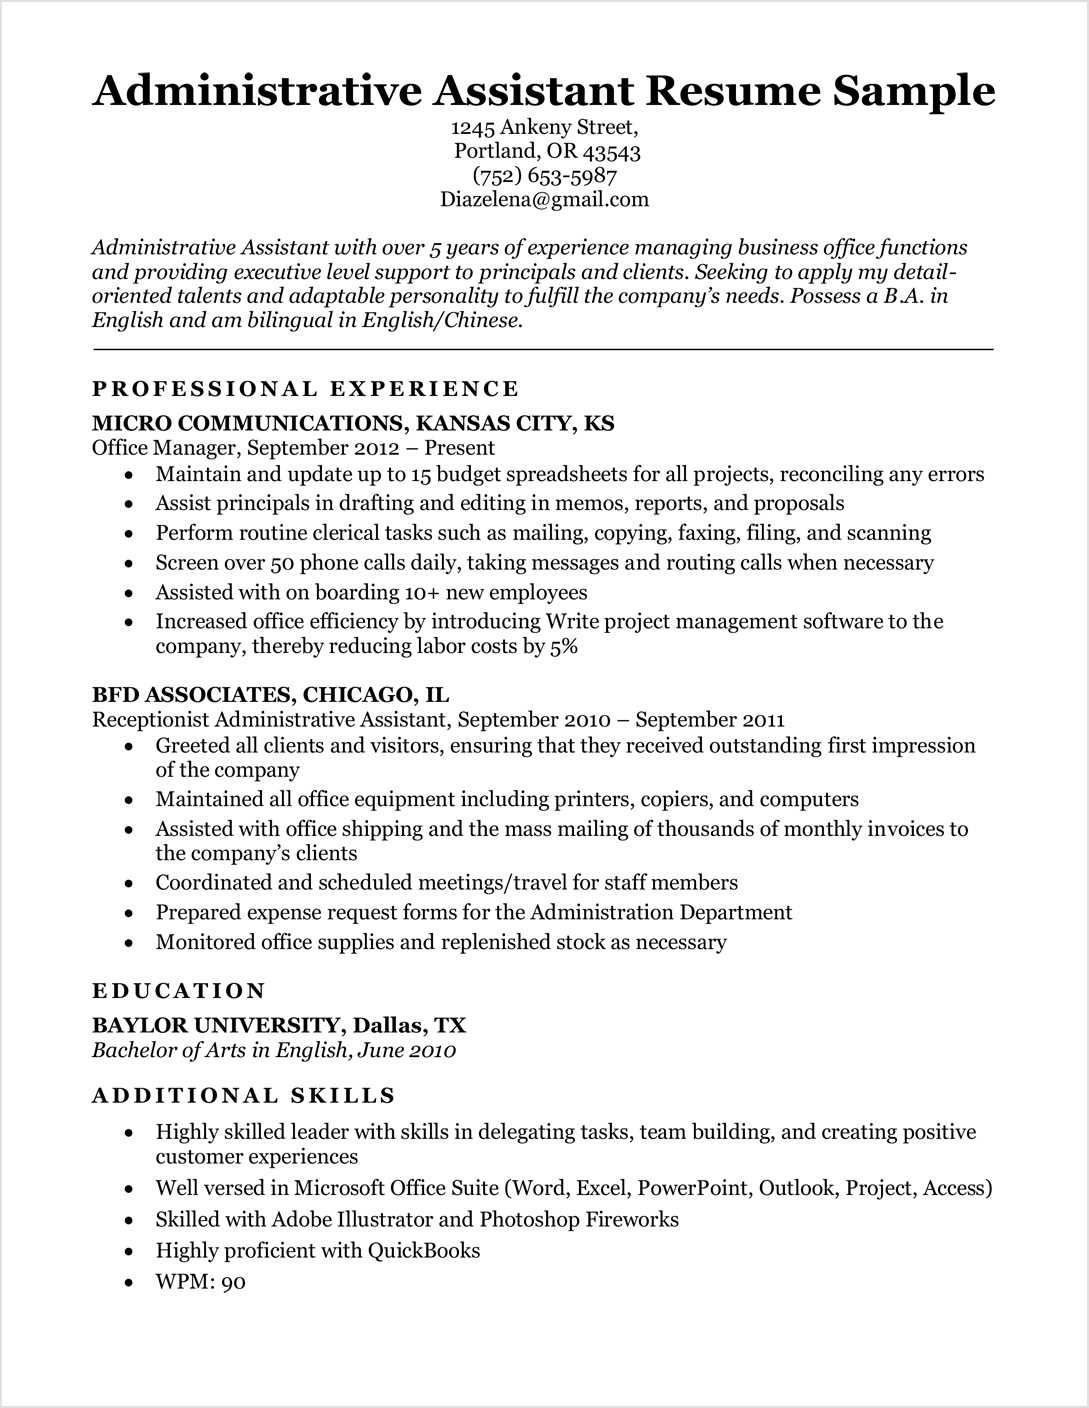 example of resume template for administrative assistant